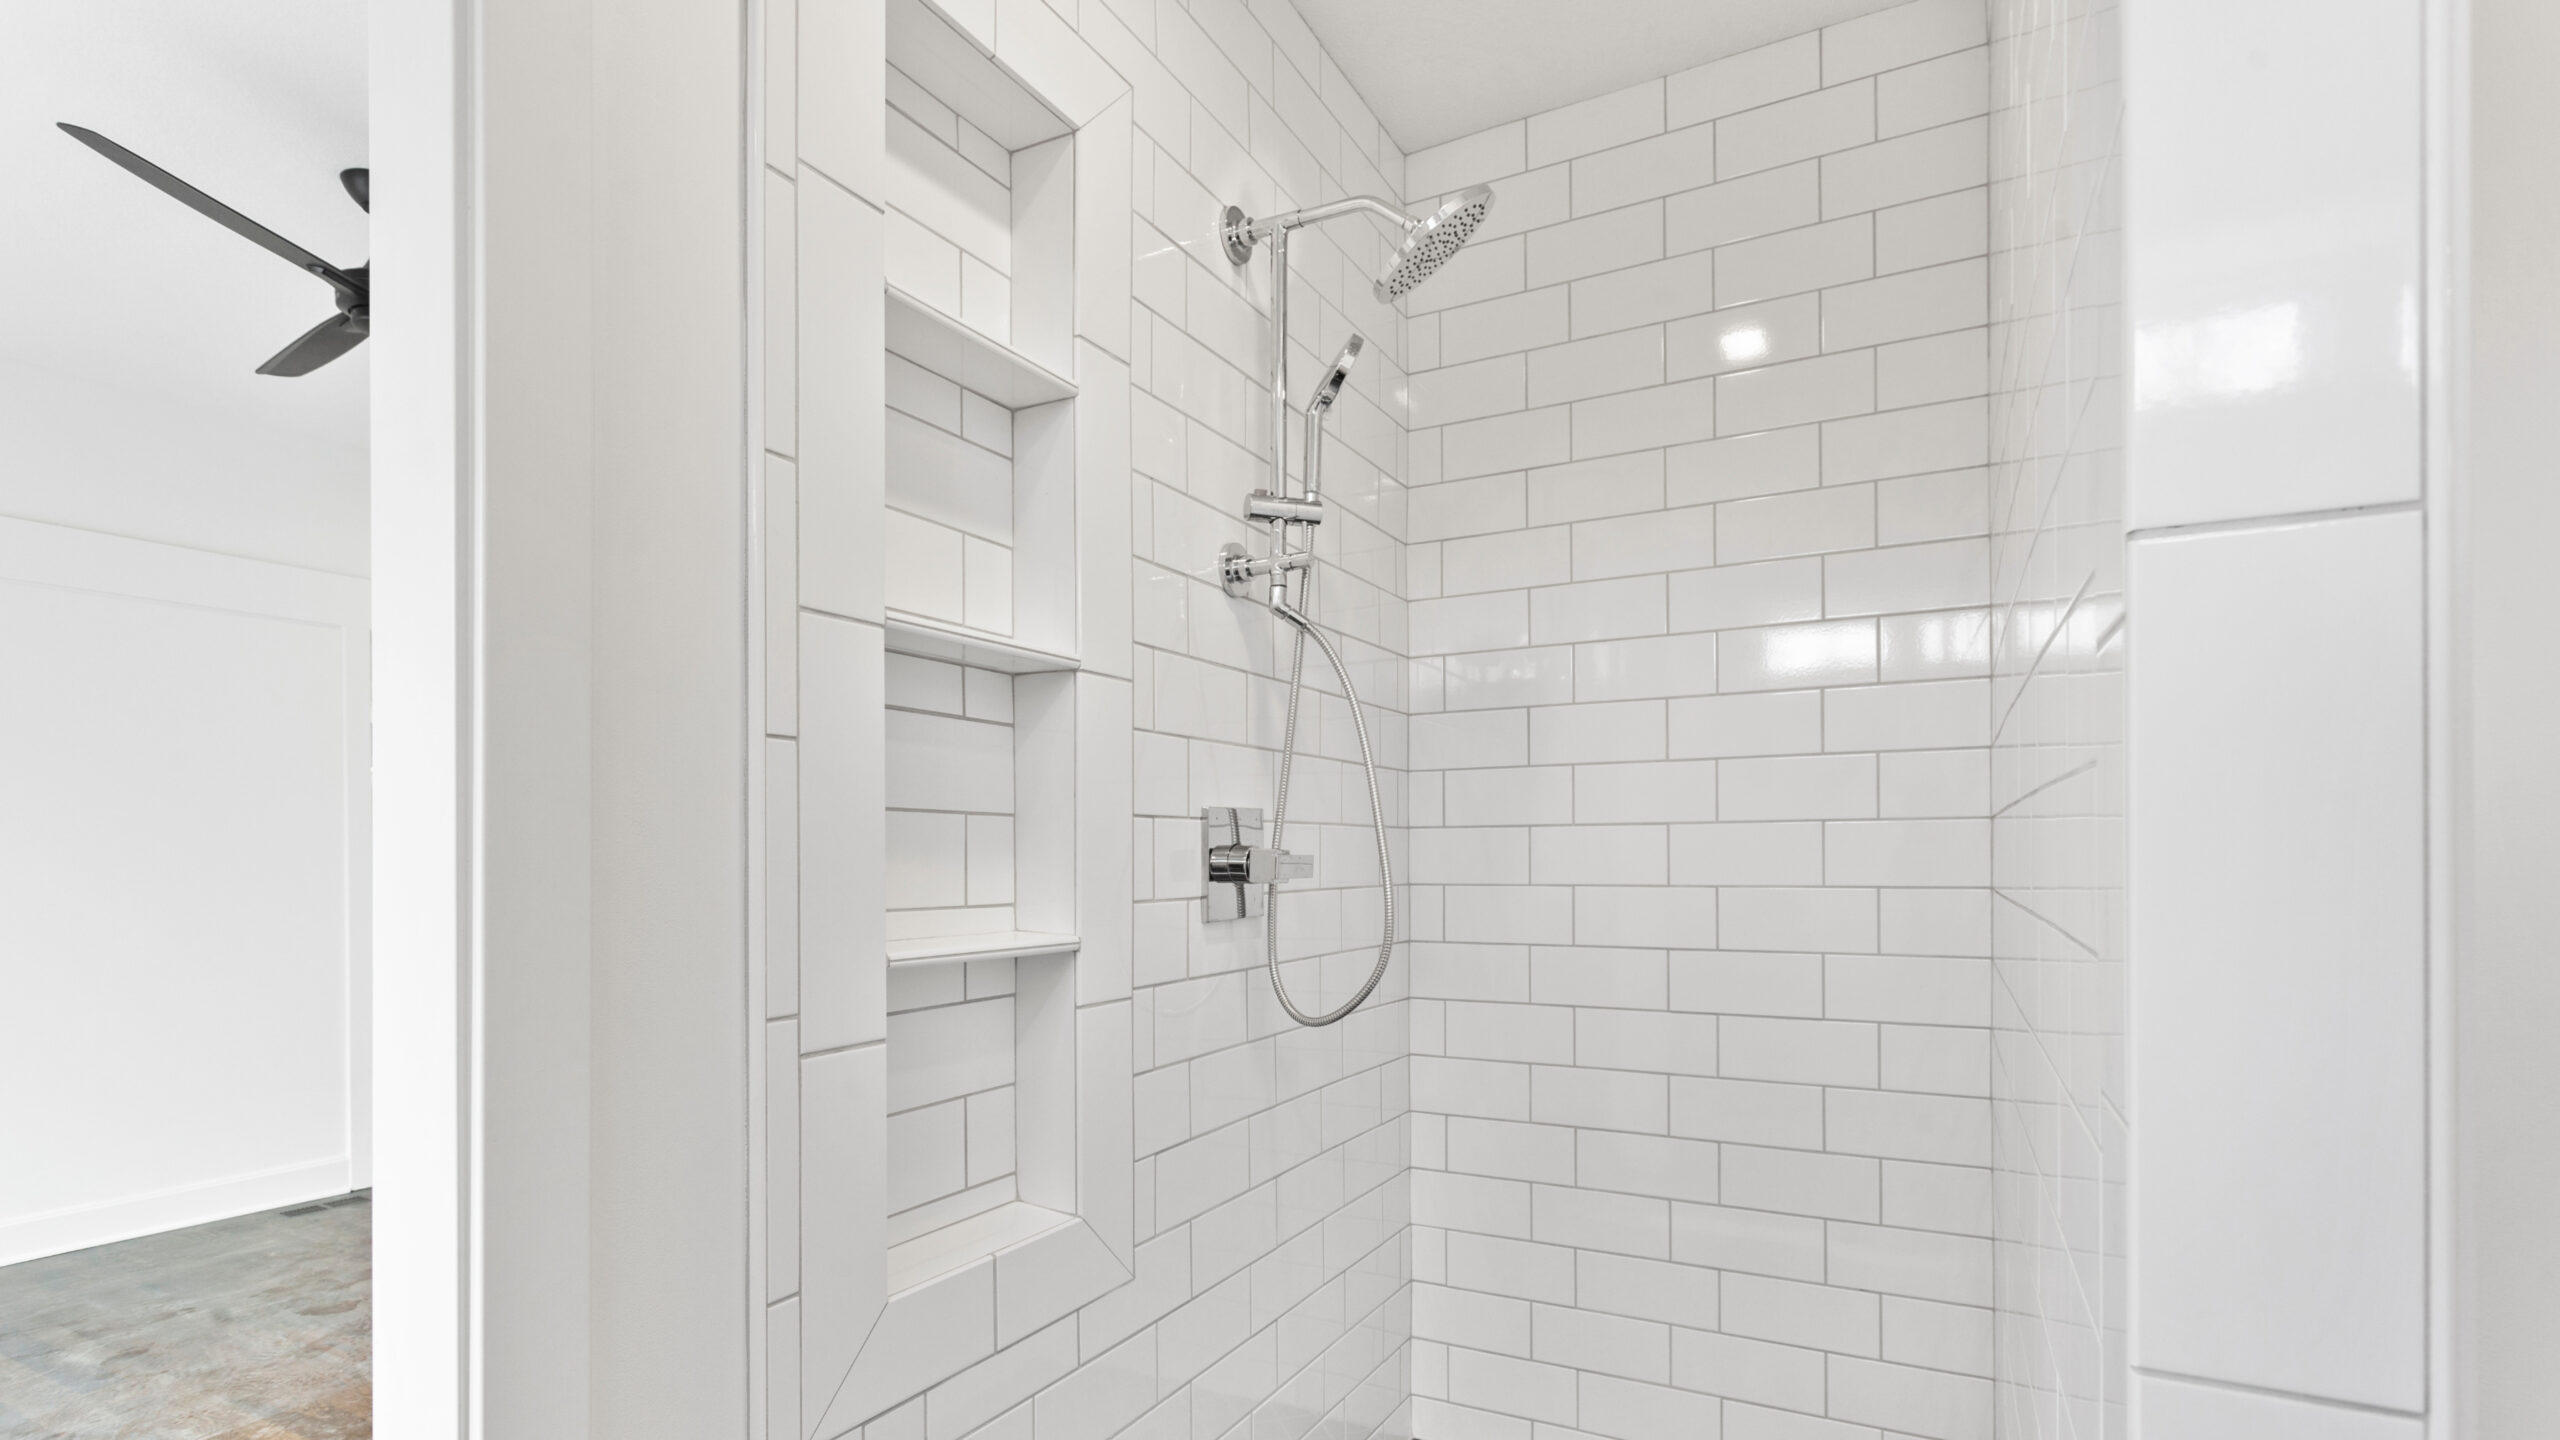 A shower with white subway tile and built-in shelving